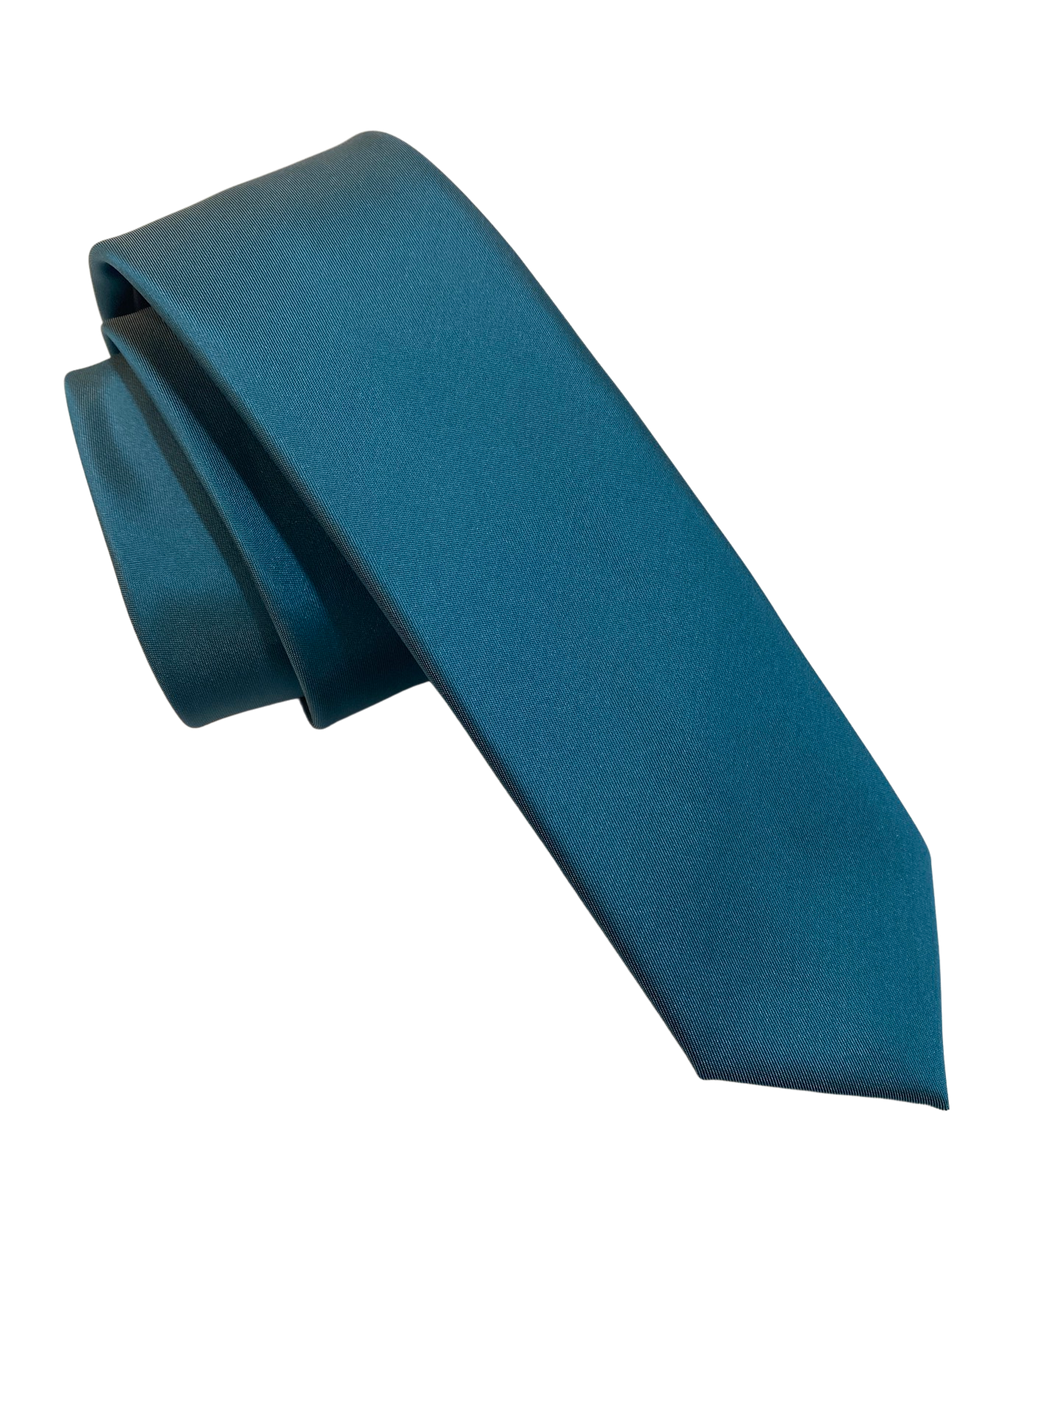 FX Fusion Teal Skinny Tie